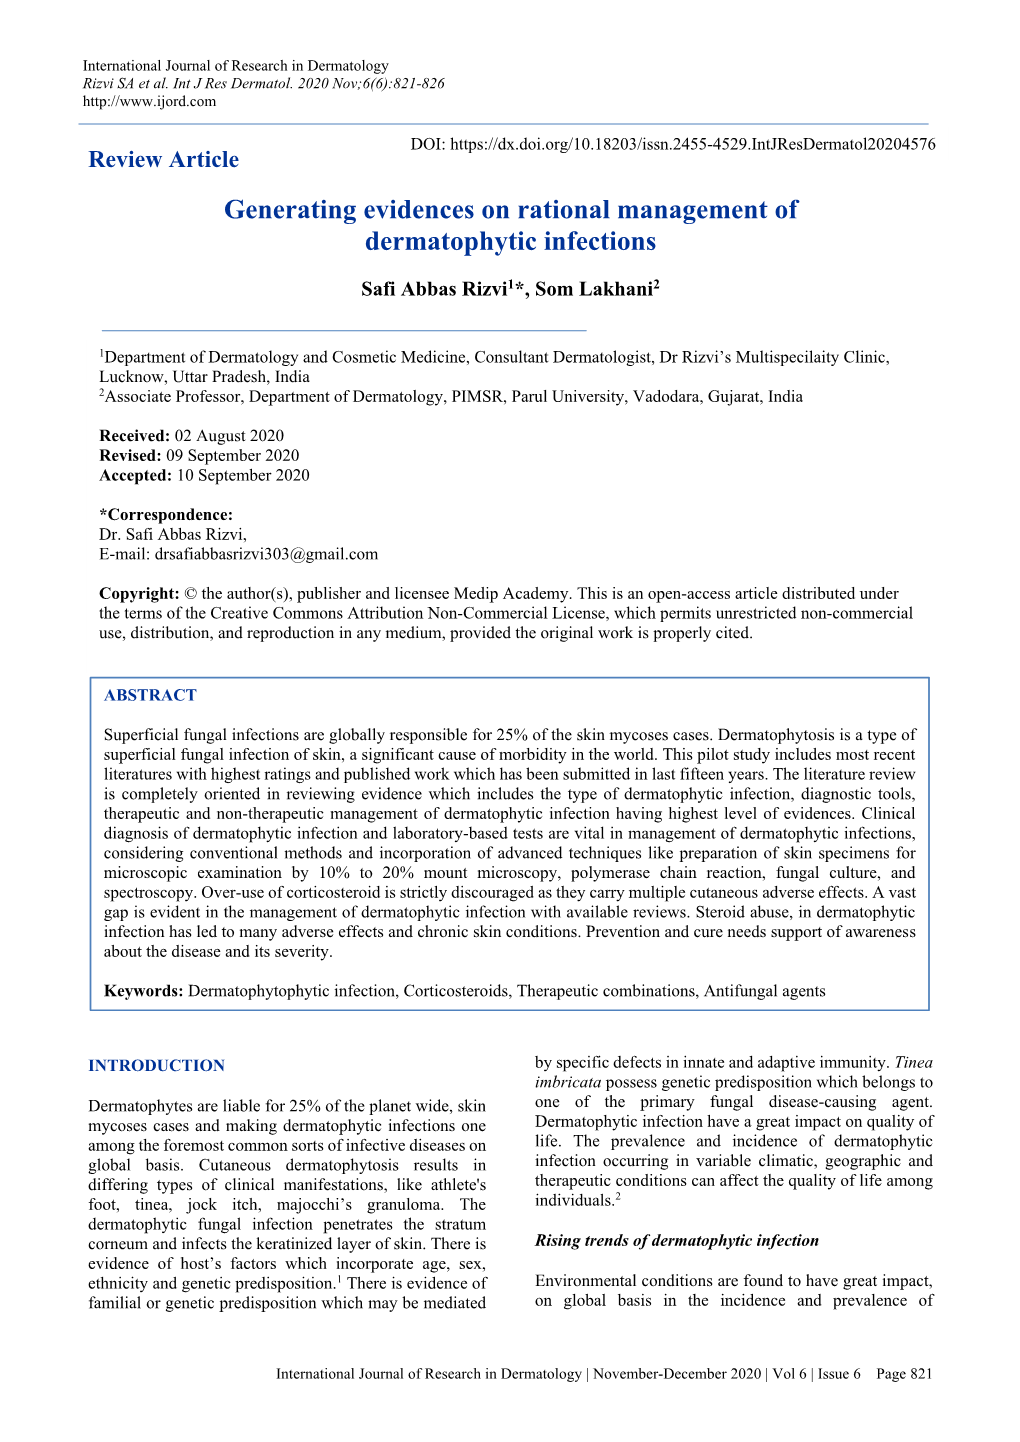 Generating Evidences on Rational Management of Dermatophytic Infections